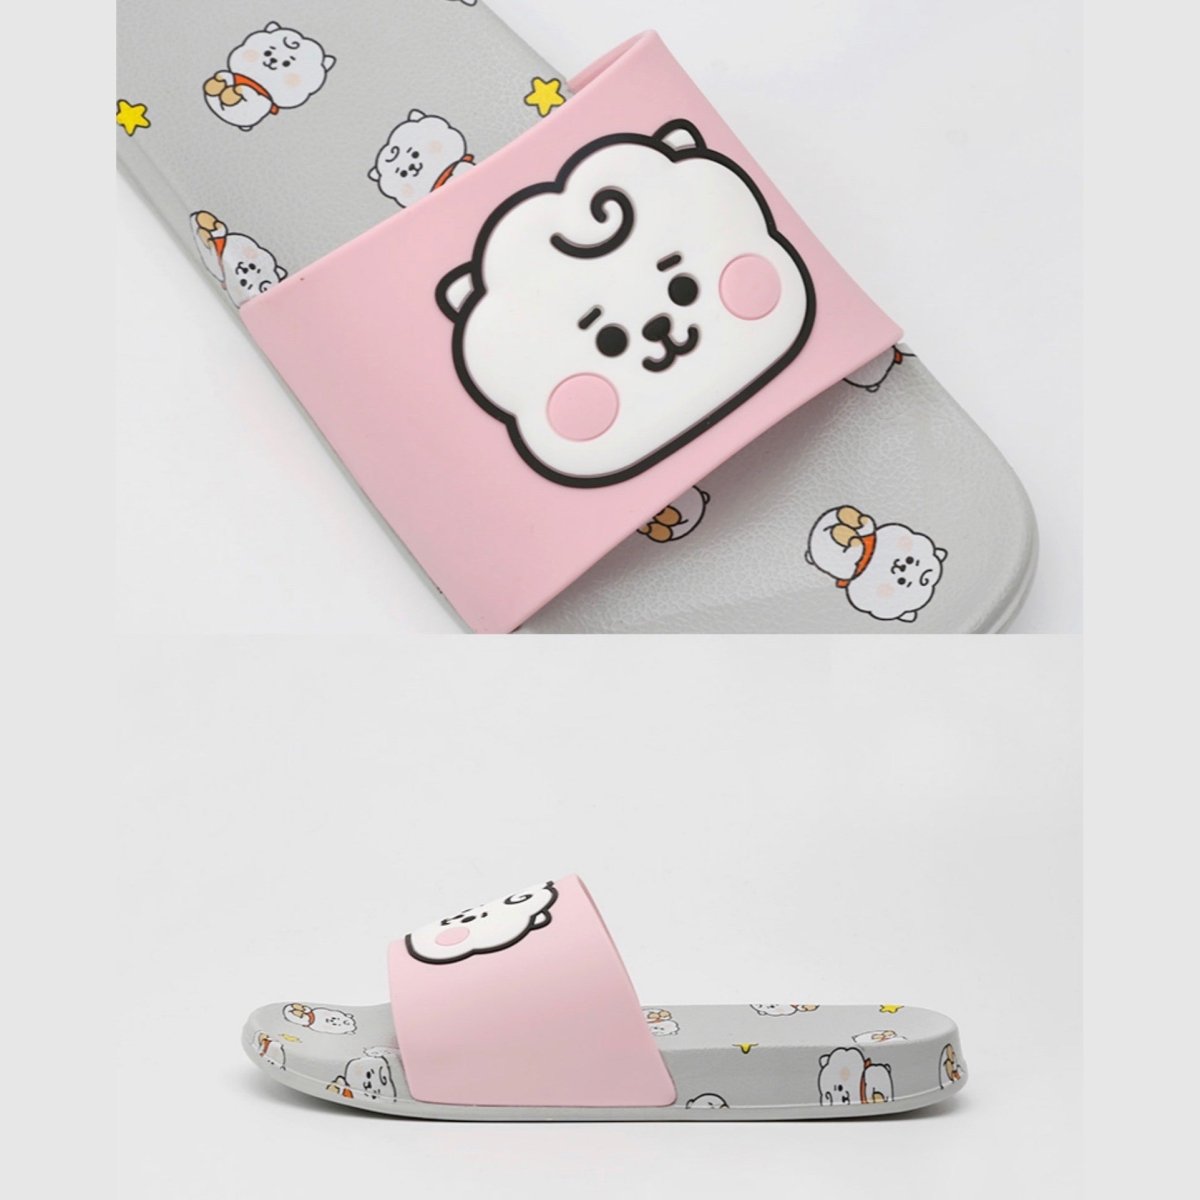 BT21 Character Slippers in RJ Ivory from @linefriendsofficial